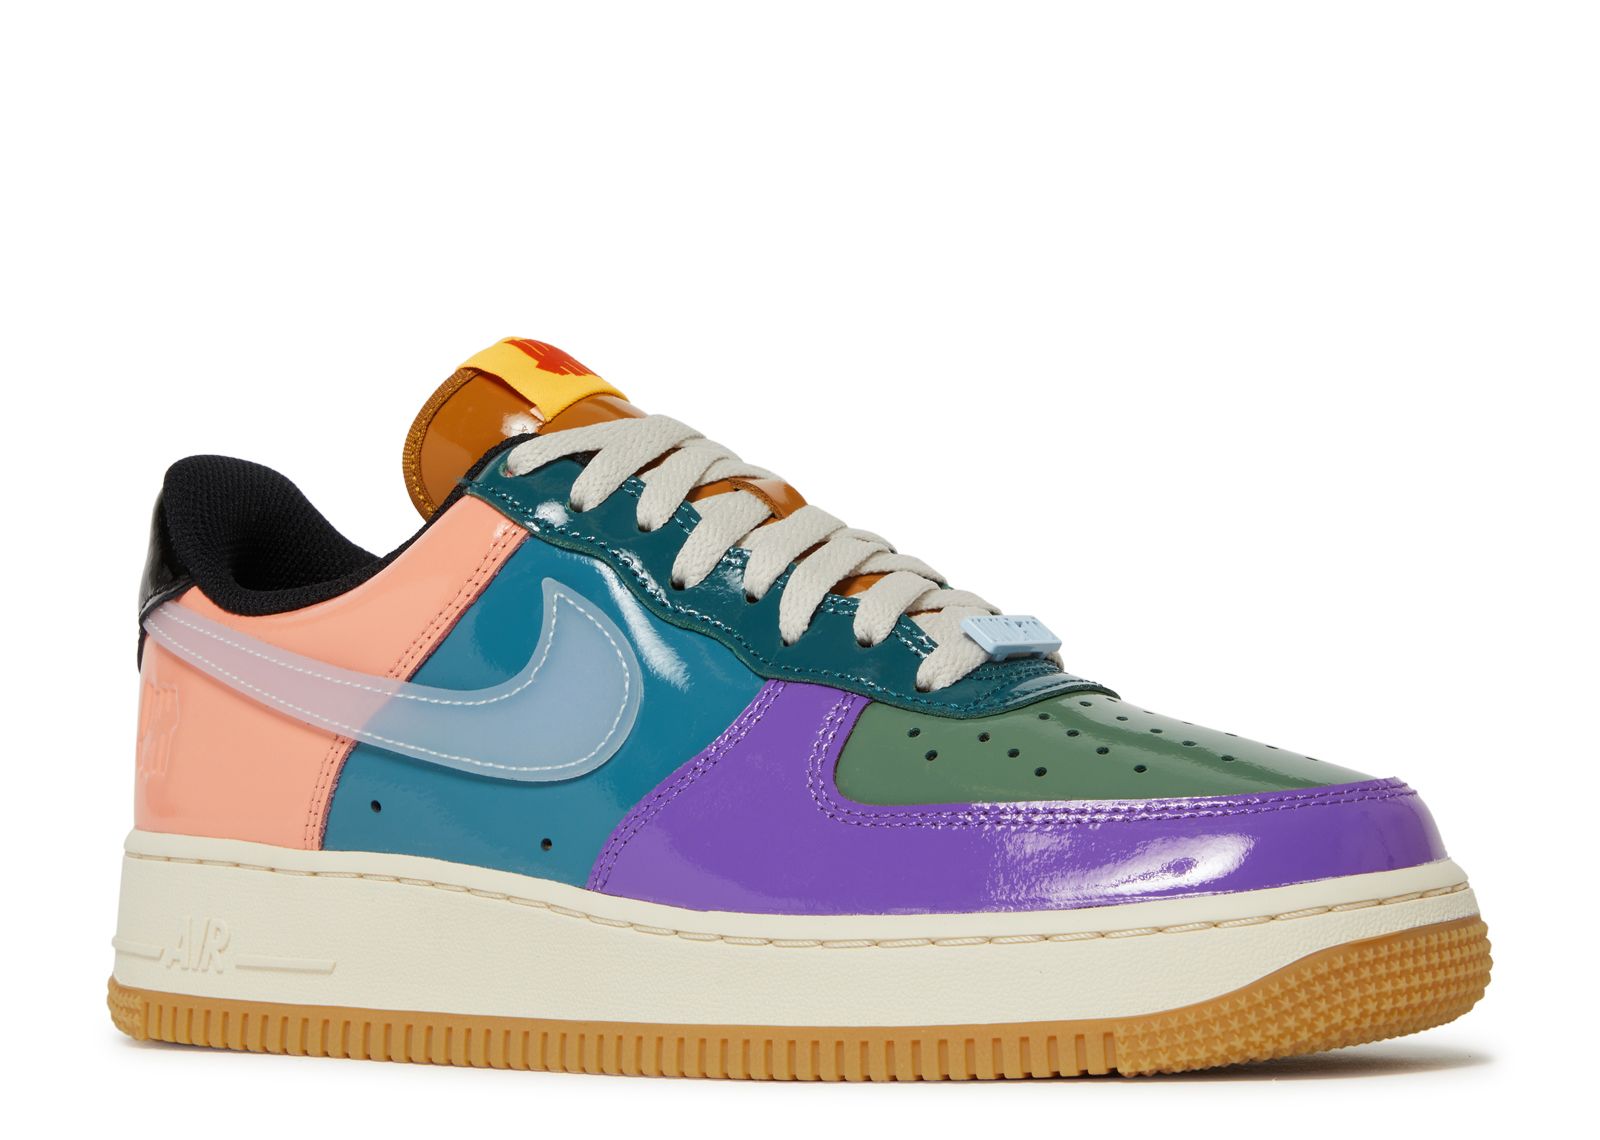 Undefeated X Air Force 1 Low 'Celestine Blue' - Nike - DV5255 500